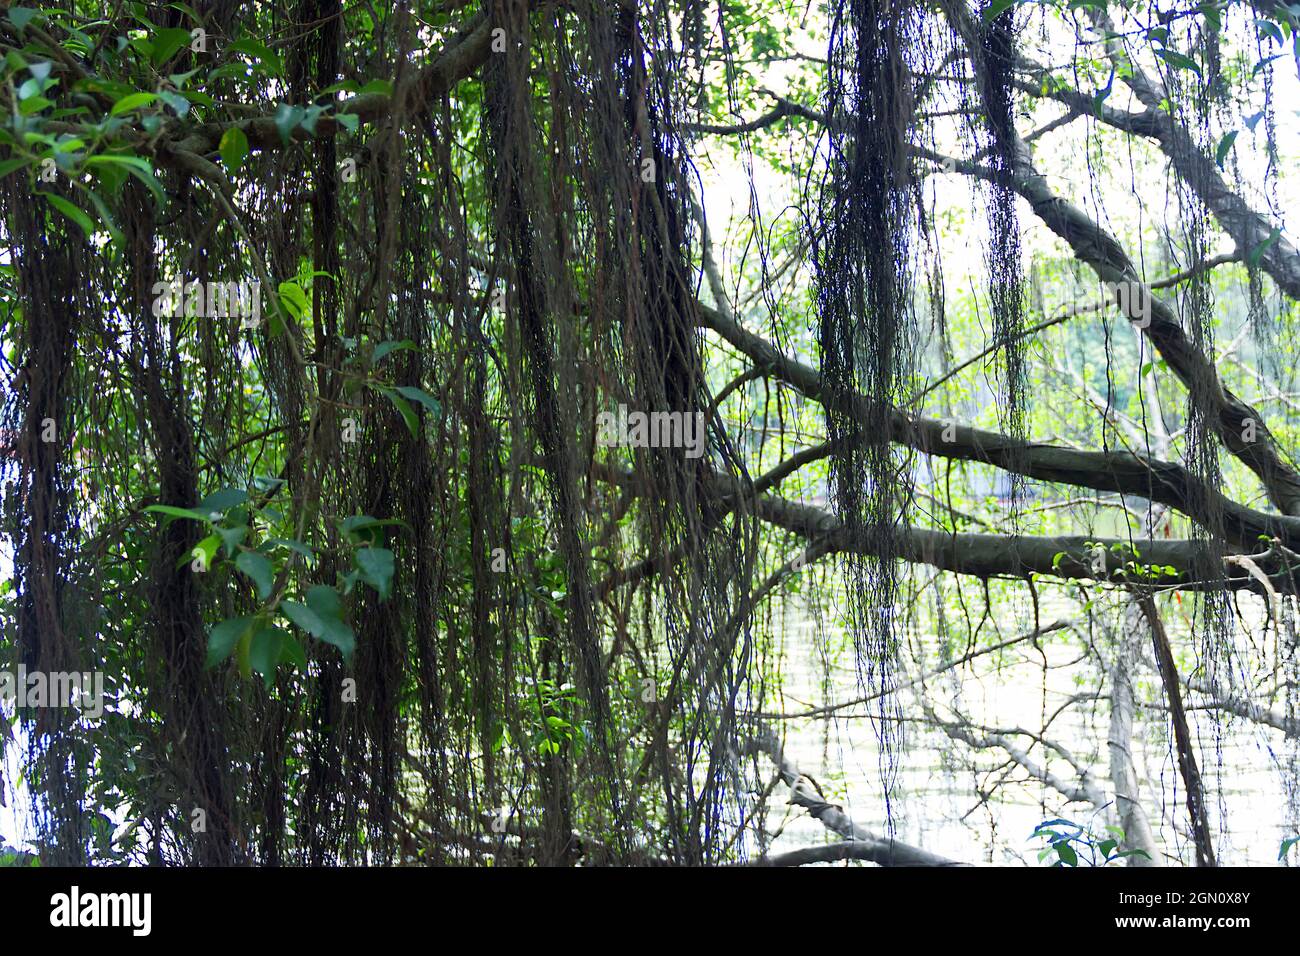 Aerating root; pneumatophore root - species of trees from the mangrove forest. Vietnam Stock Photo